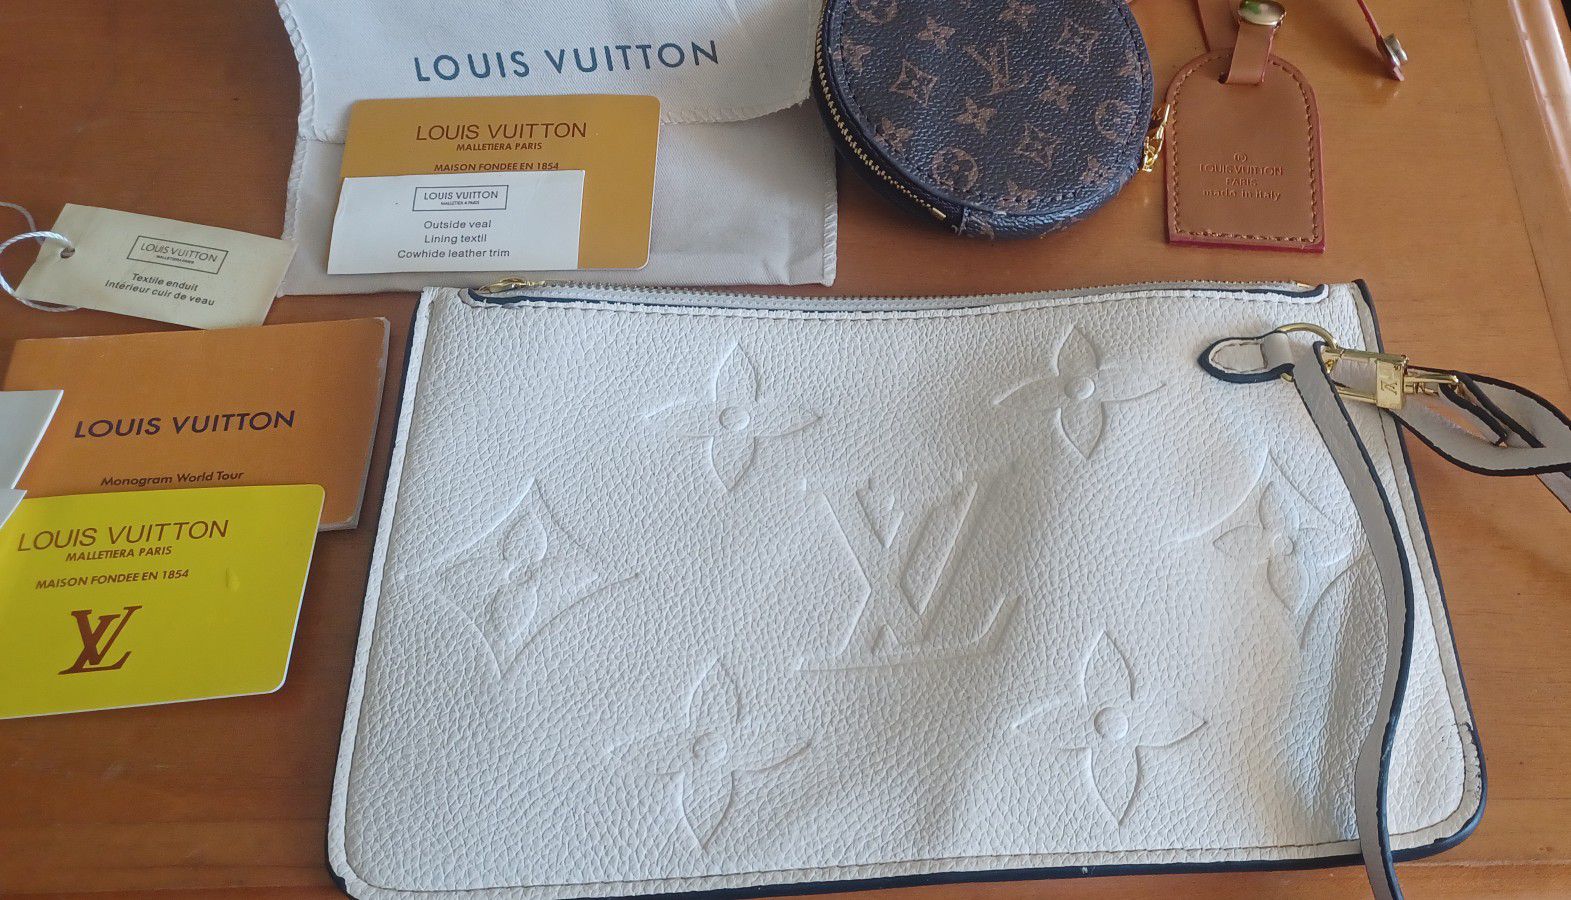 louis vuitton outside veal lining textile cowhide leather trim